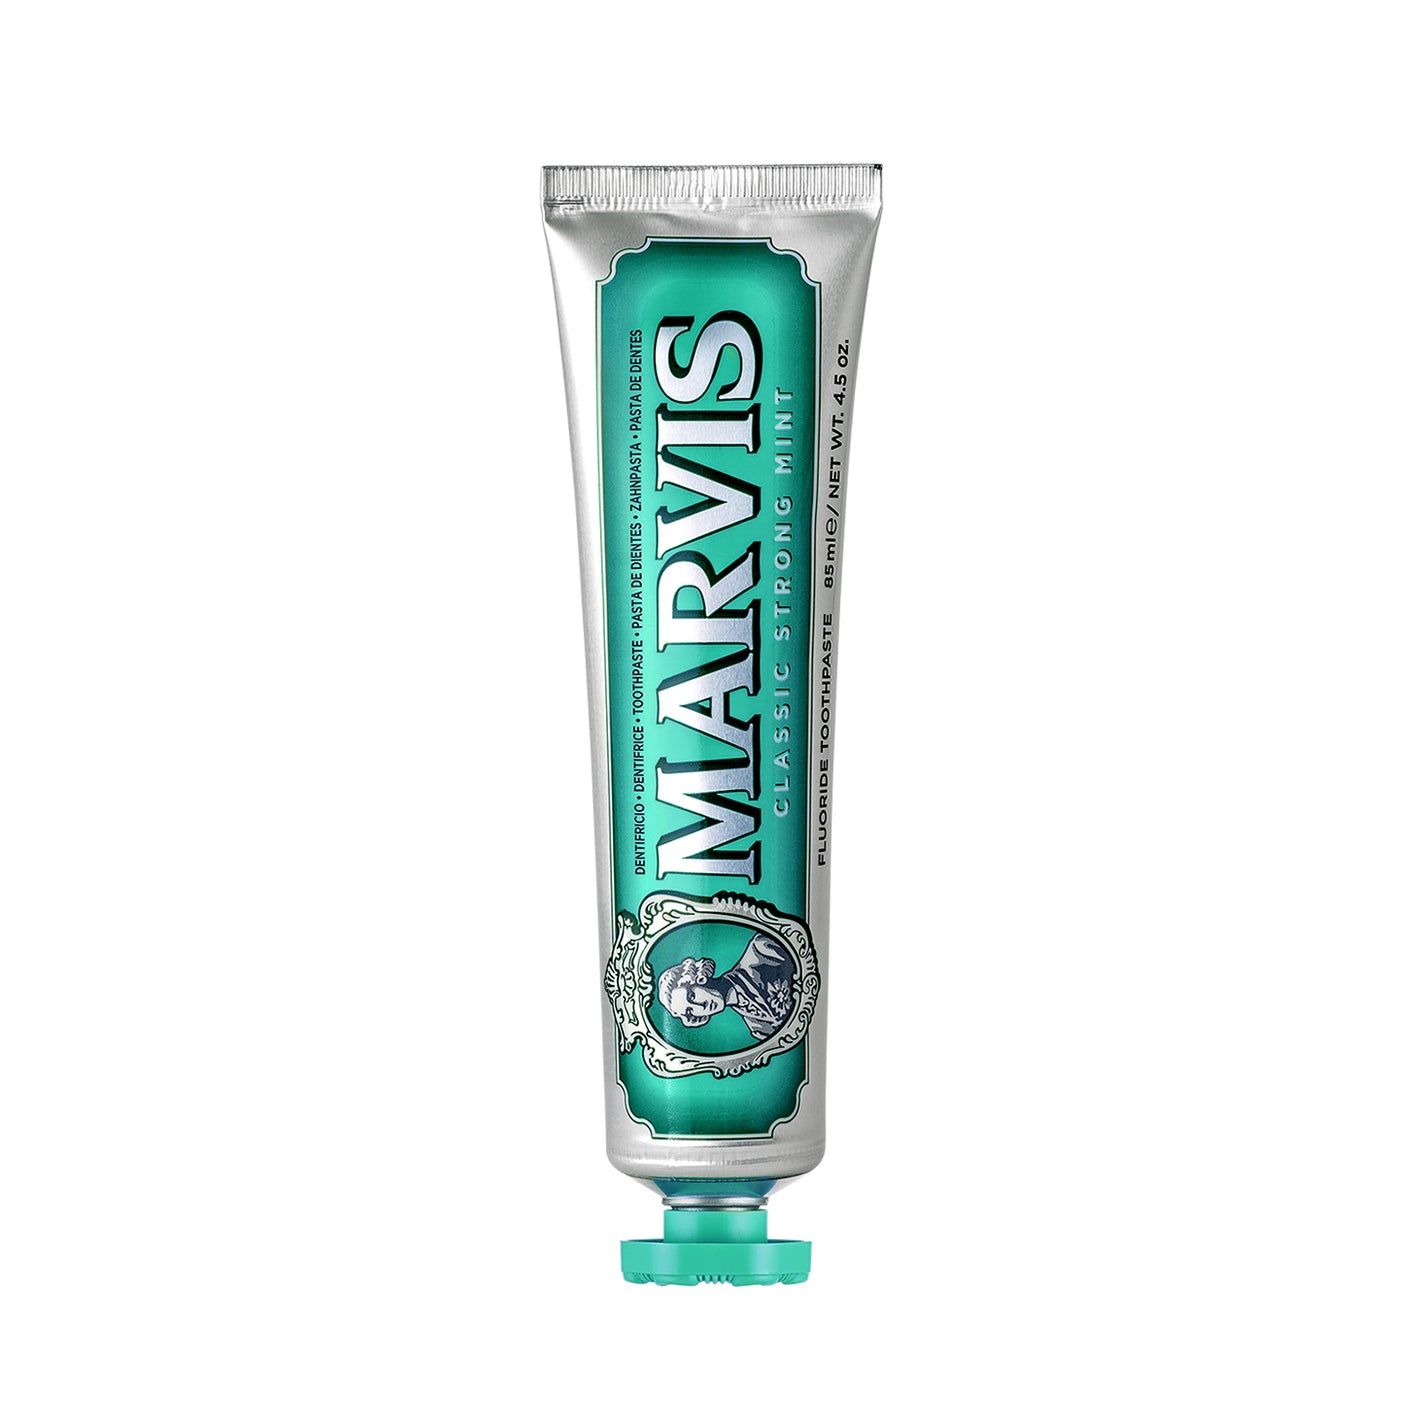 Marvis Strong Mint Toothpaste - 85ml